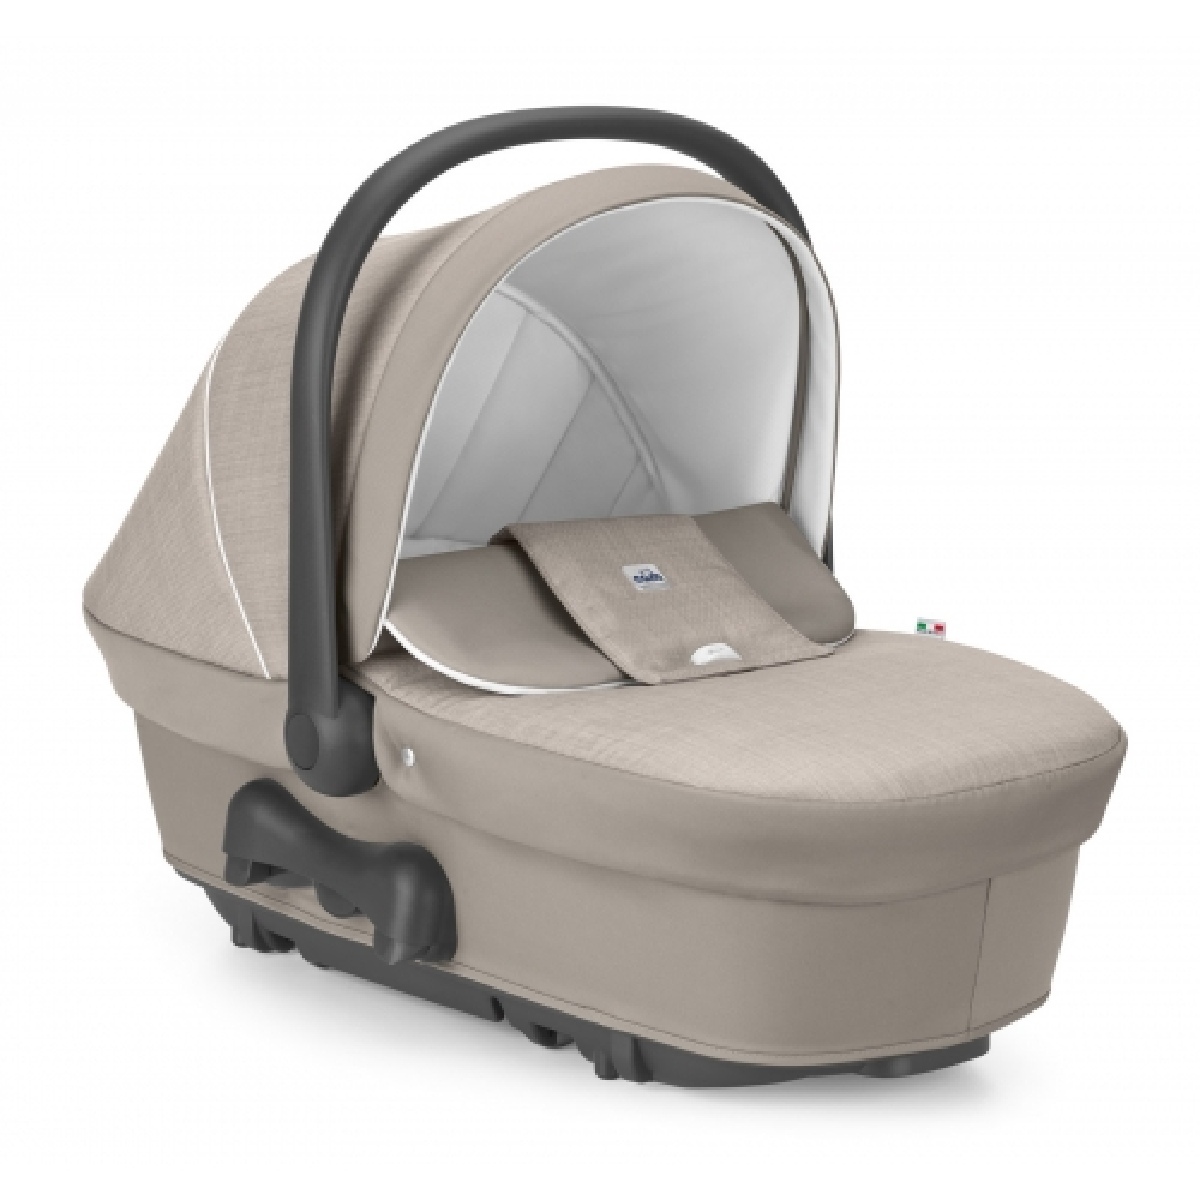 Cam - Coccola Baby infant Carrycot travel full body support, Beside sleeper, Bassinet, Portable bed, brethable cotton, Pressure protection, outdoor, picnic and travel - Beige